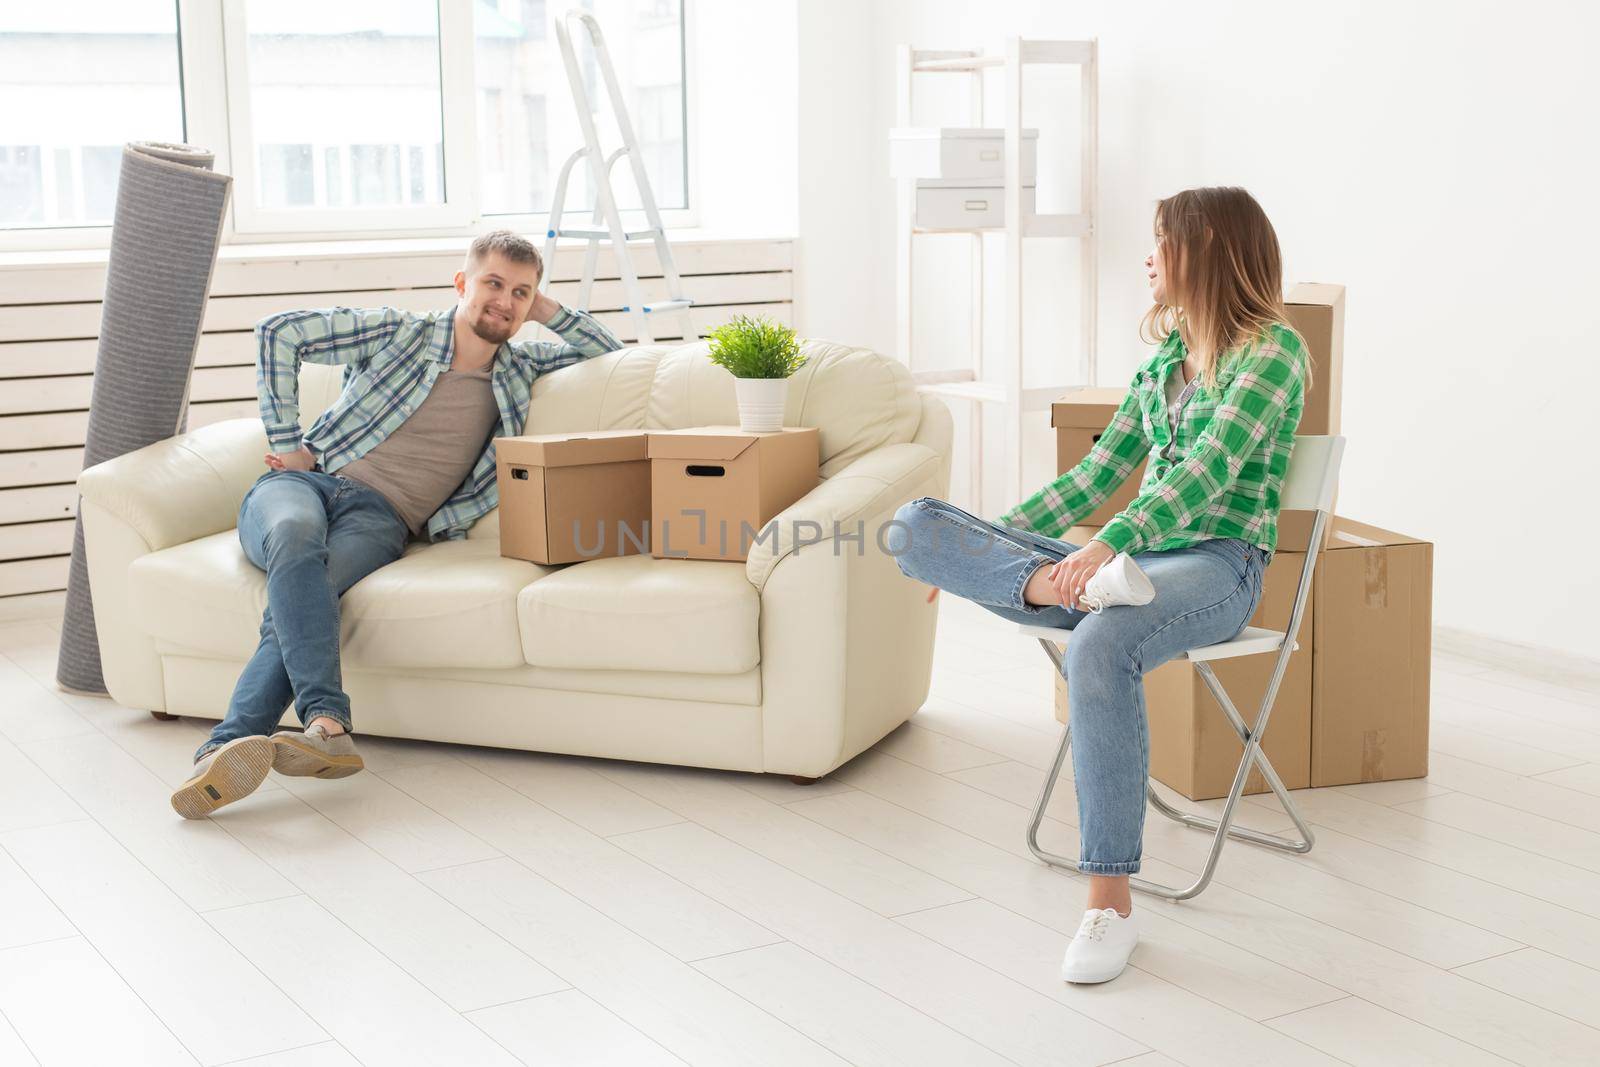 Positive smiling young girl sitting against her laughing in a new living room while moving to a new home. The concept of joy from the possibility of finding new housing. by Satura86